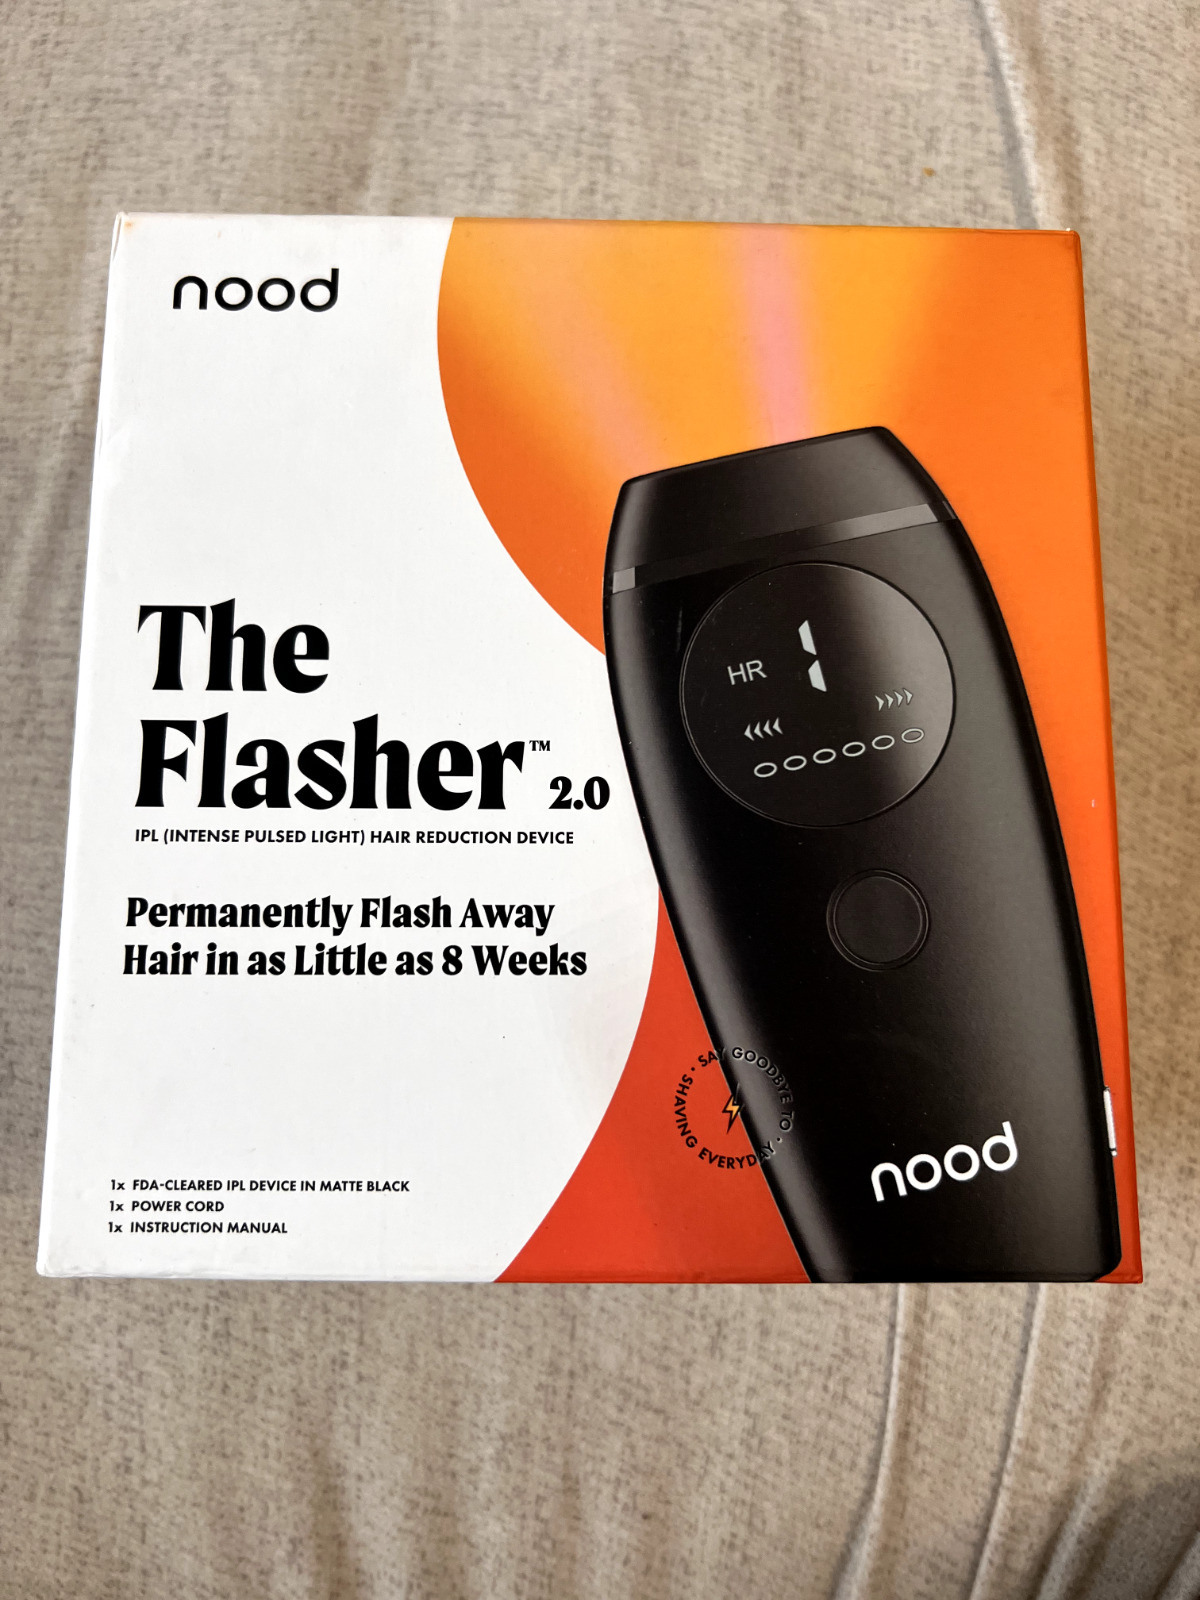 Nood The Flasher 2.0 IPL Laser Hair Removal Handset-BLACK - NEW - open box